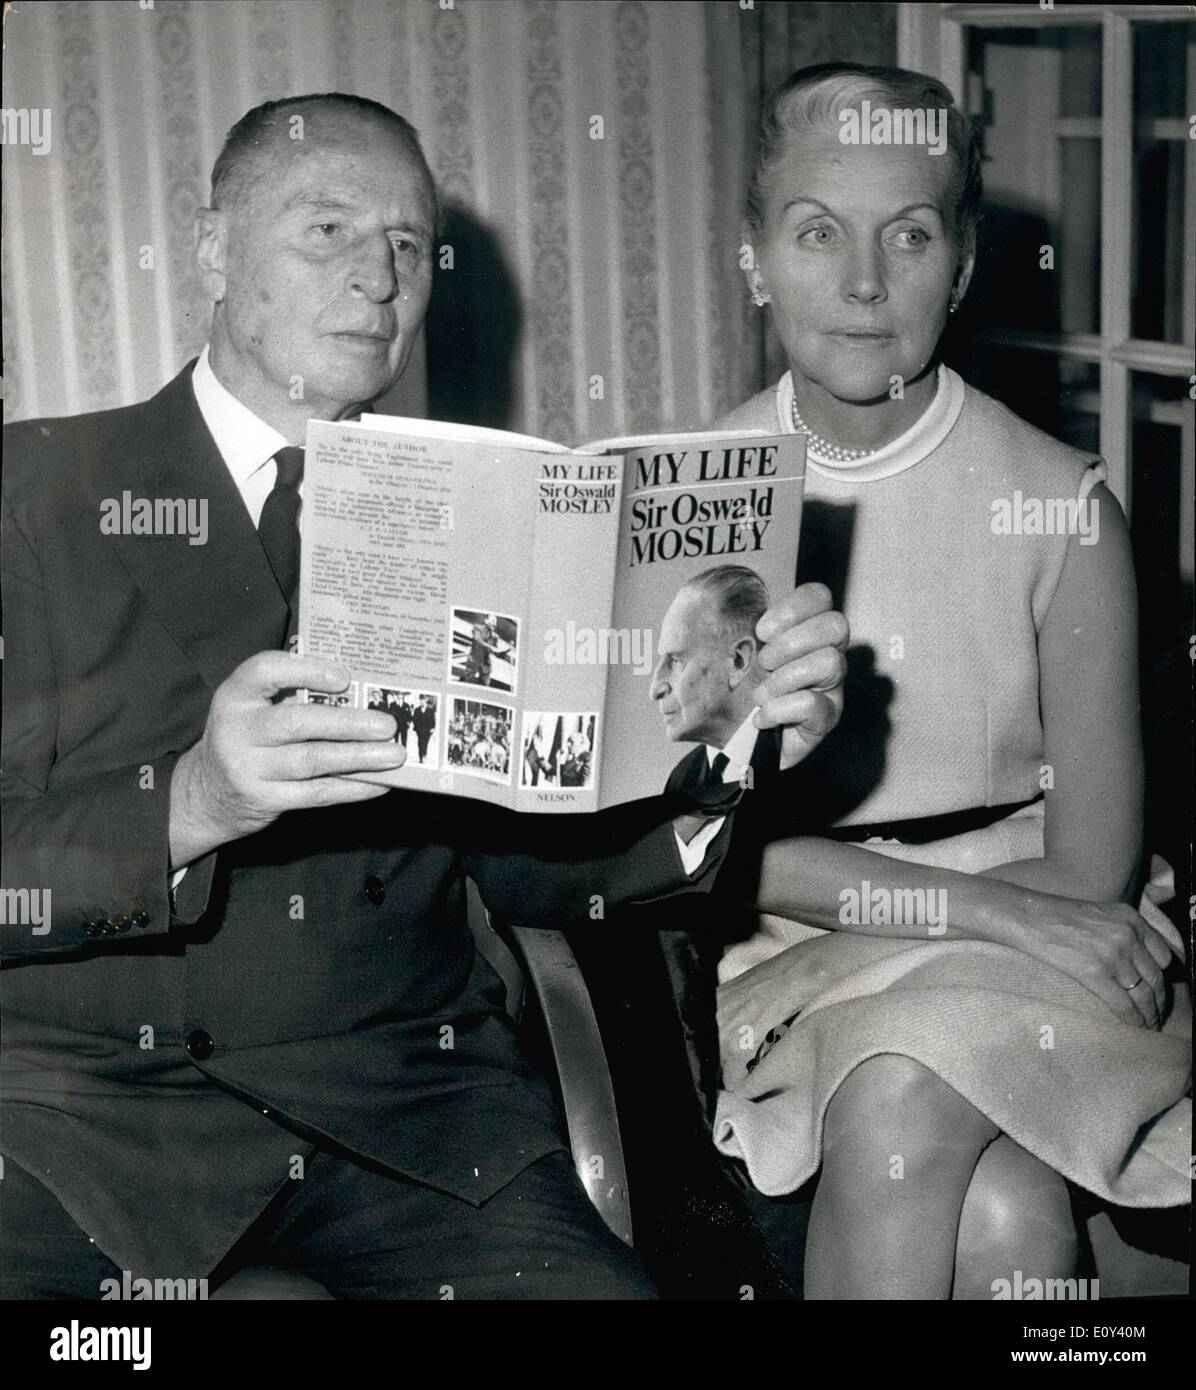 Oct. 10, 1968 - Sir Oswald Mosley Hold Press Conference to Launch his Autobiography ''My Life'': Sir Oswald Mosley, the one time leader of the Blackshirt.Movement in Britain, pictured with his book ''My Life'' as he poses with his wife at the press conference held at the Cafe Royal to launch his book this opening. Stock Photo